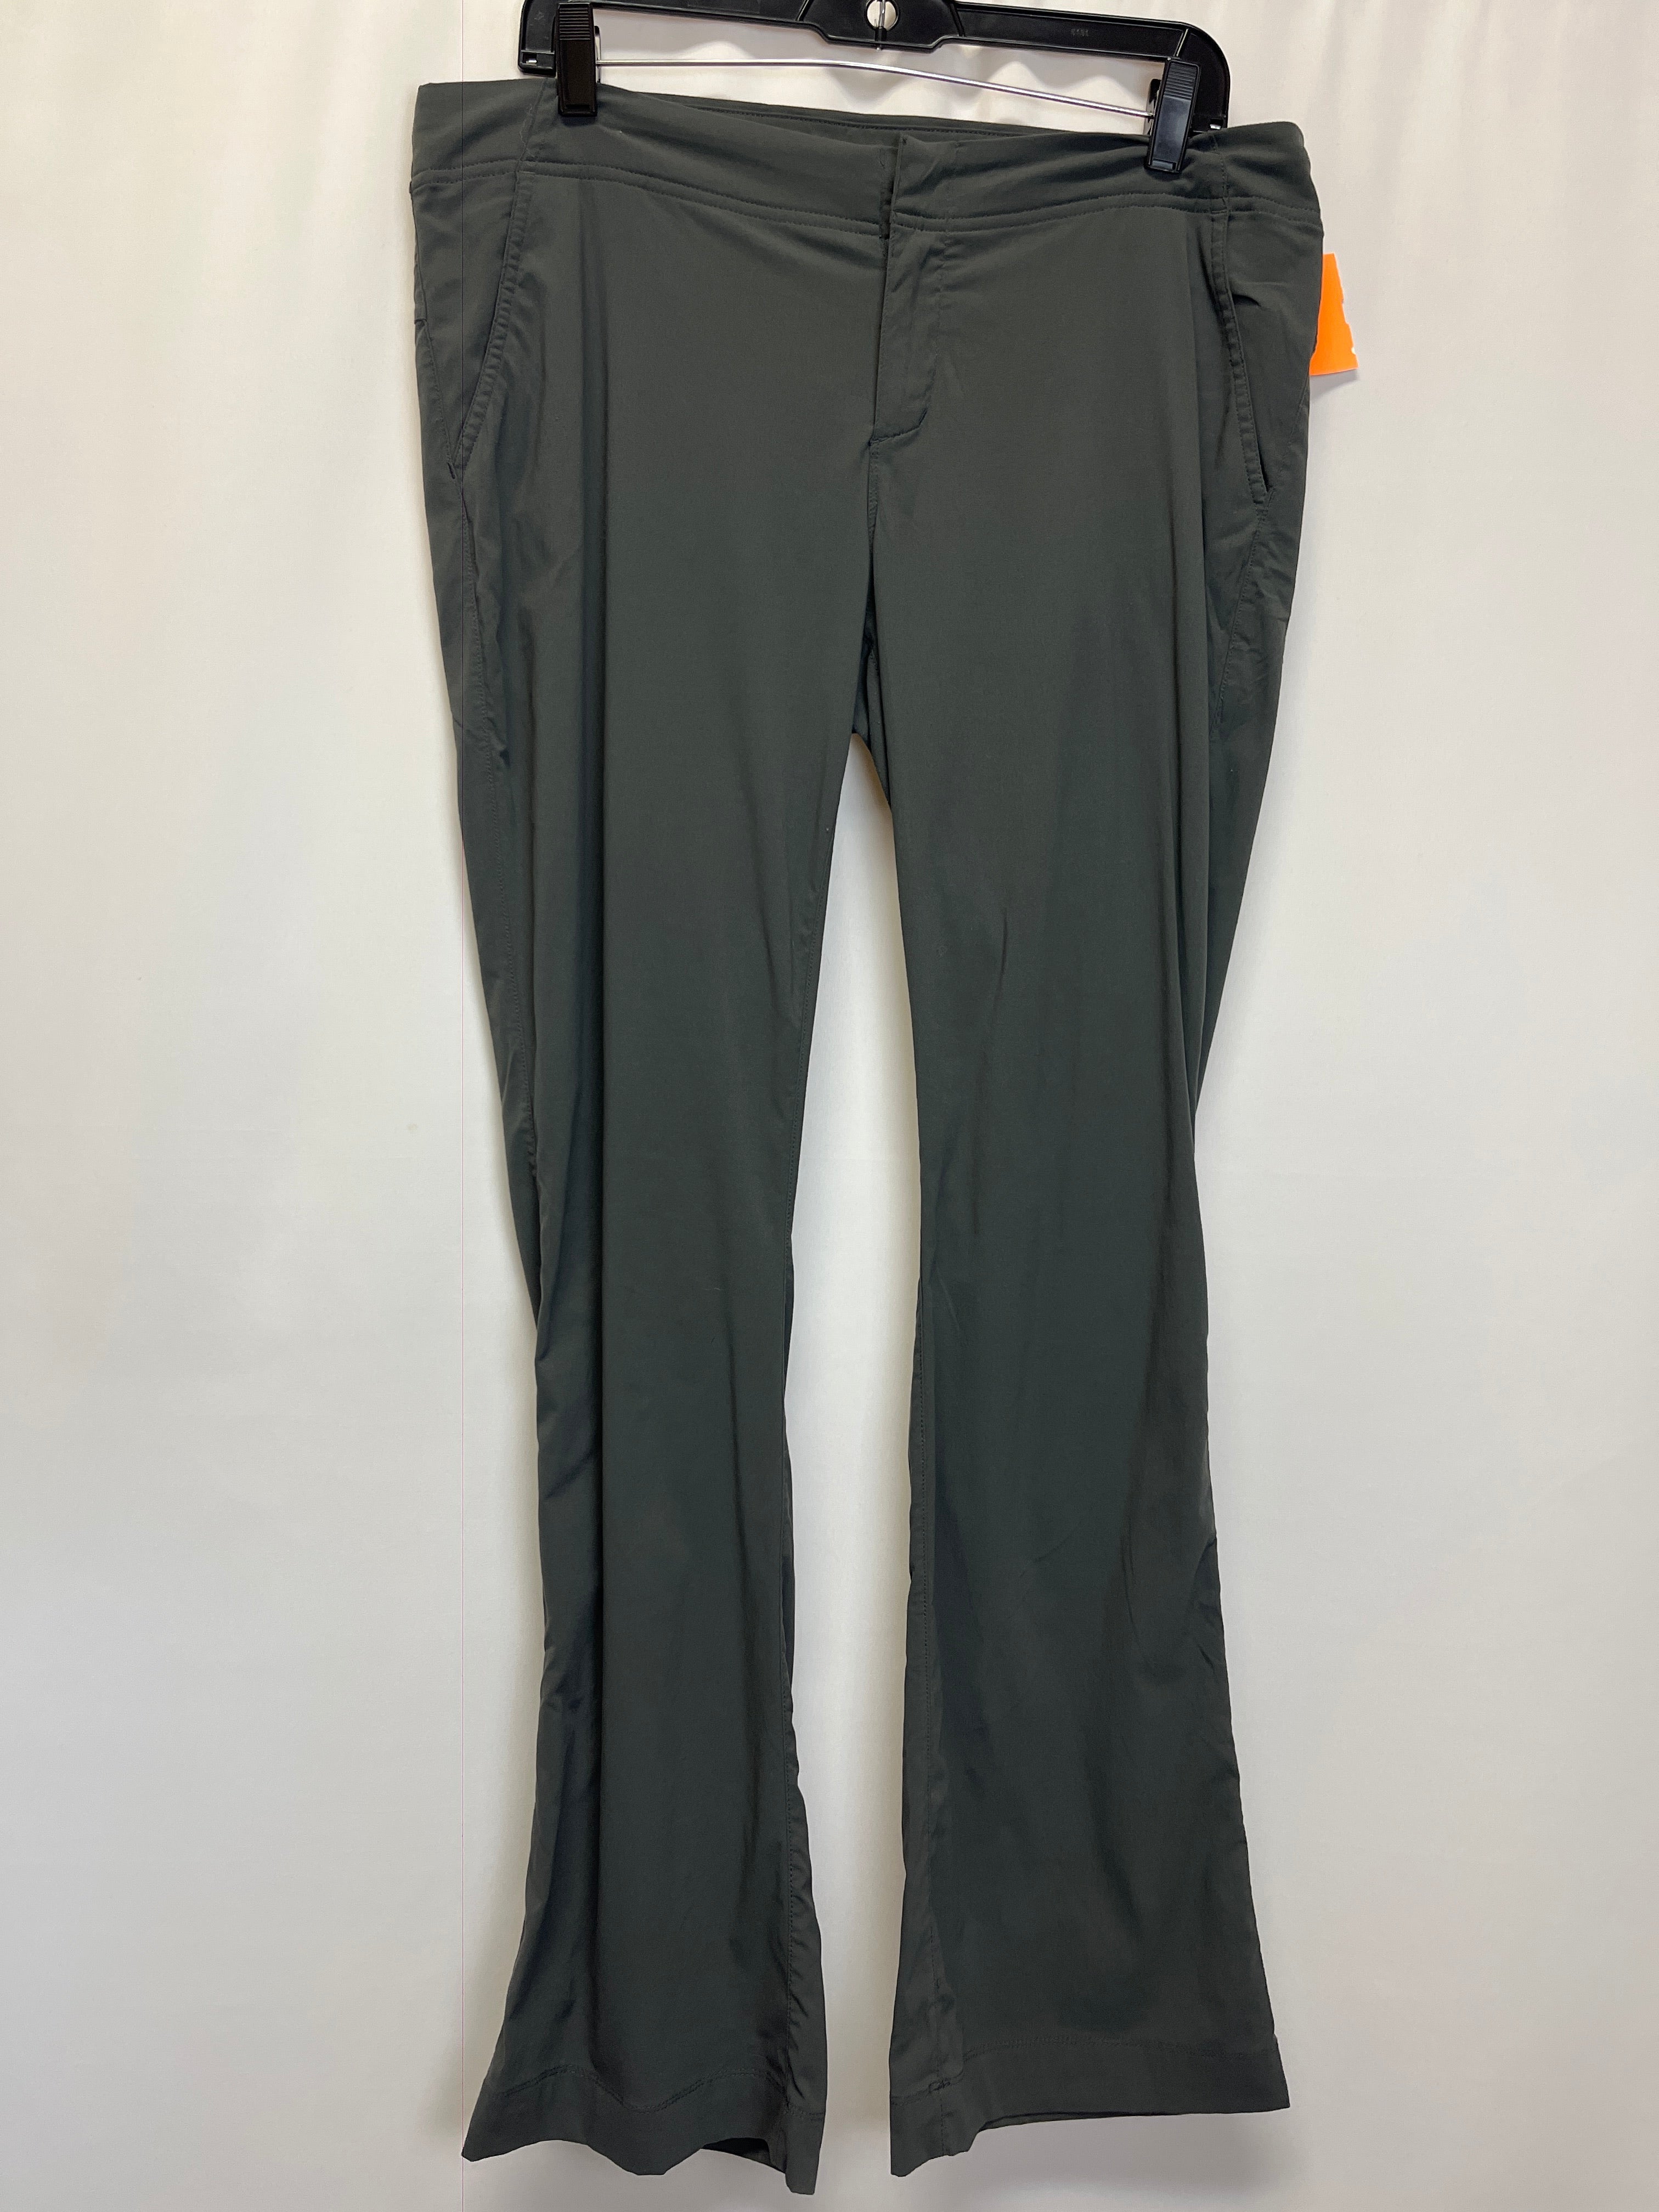 Columbia Omni Shield Advanced Repellency Womens Black Hiking Pants Sz 8 for  Sale in Lakewood, WI - OfferUp